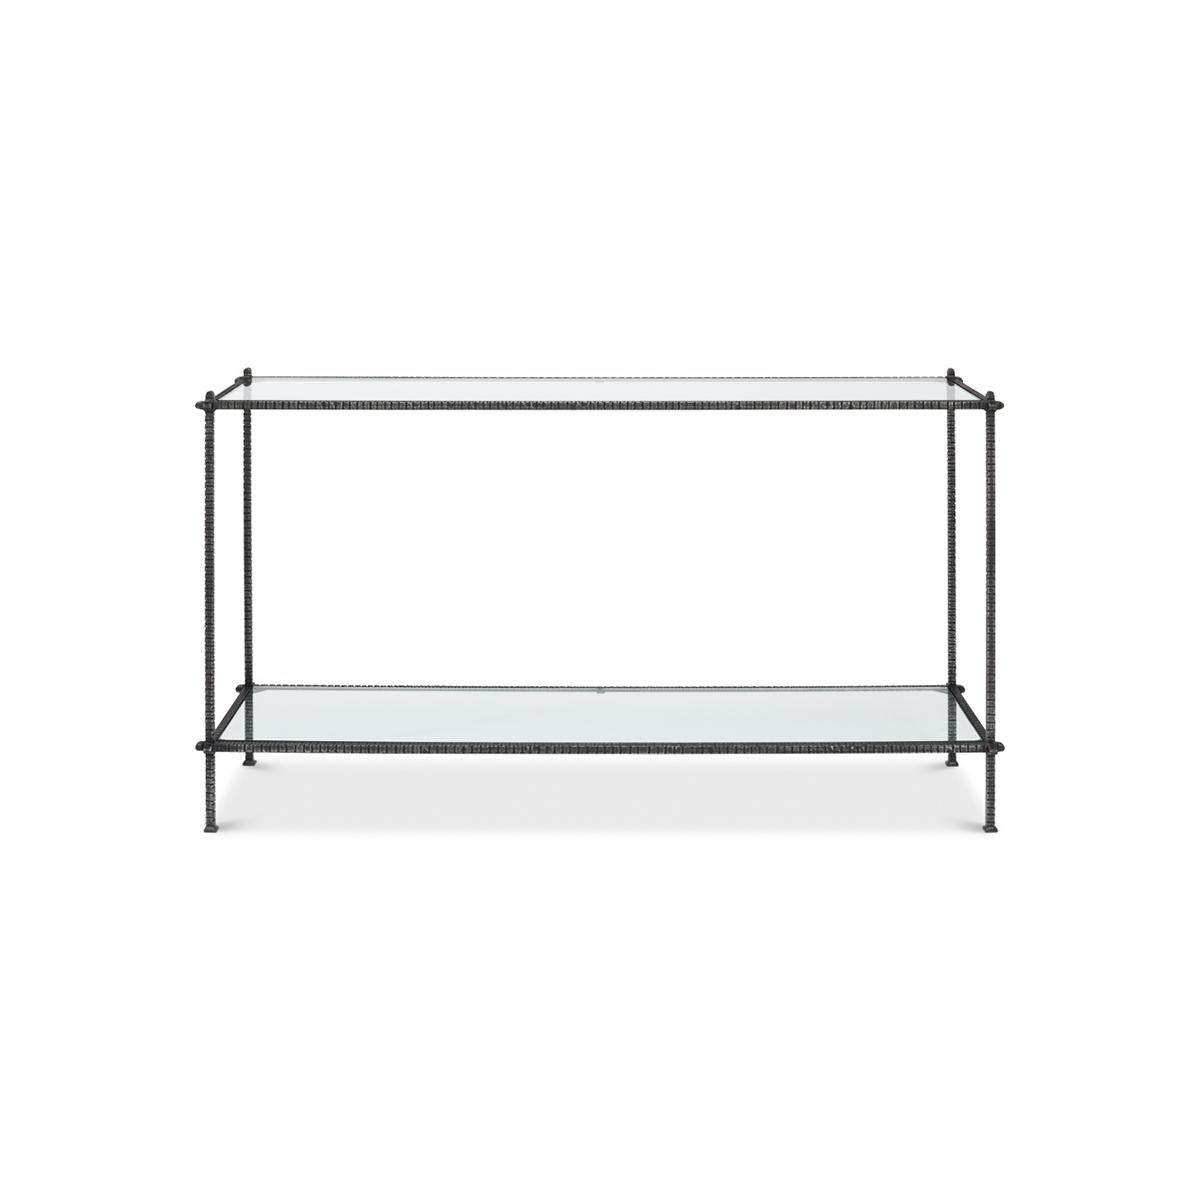 Mid-century iron and glass console table, the frame is solid iron bar stock that is hand wrought and incised with continuous ridges on all 4 sides. With three-point corners, an inset glass top tier and a lower shelf stretcher base.

Dimensions: